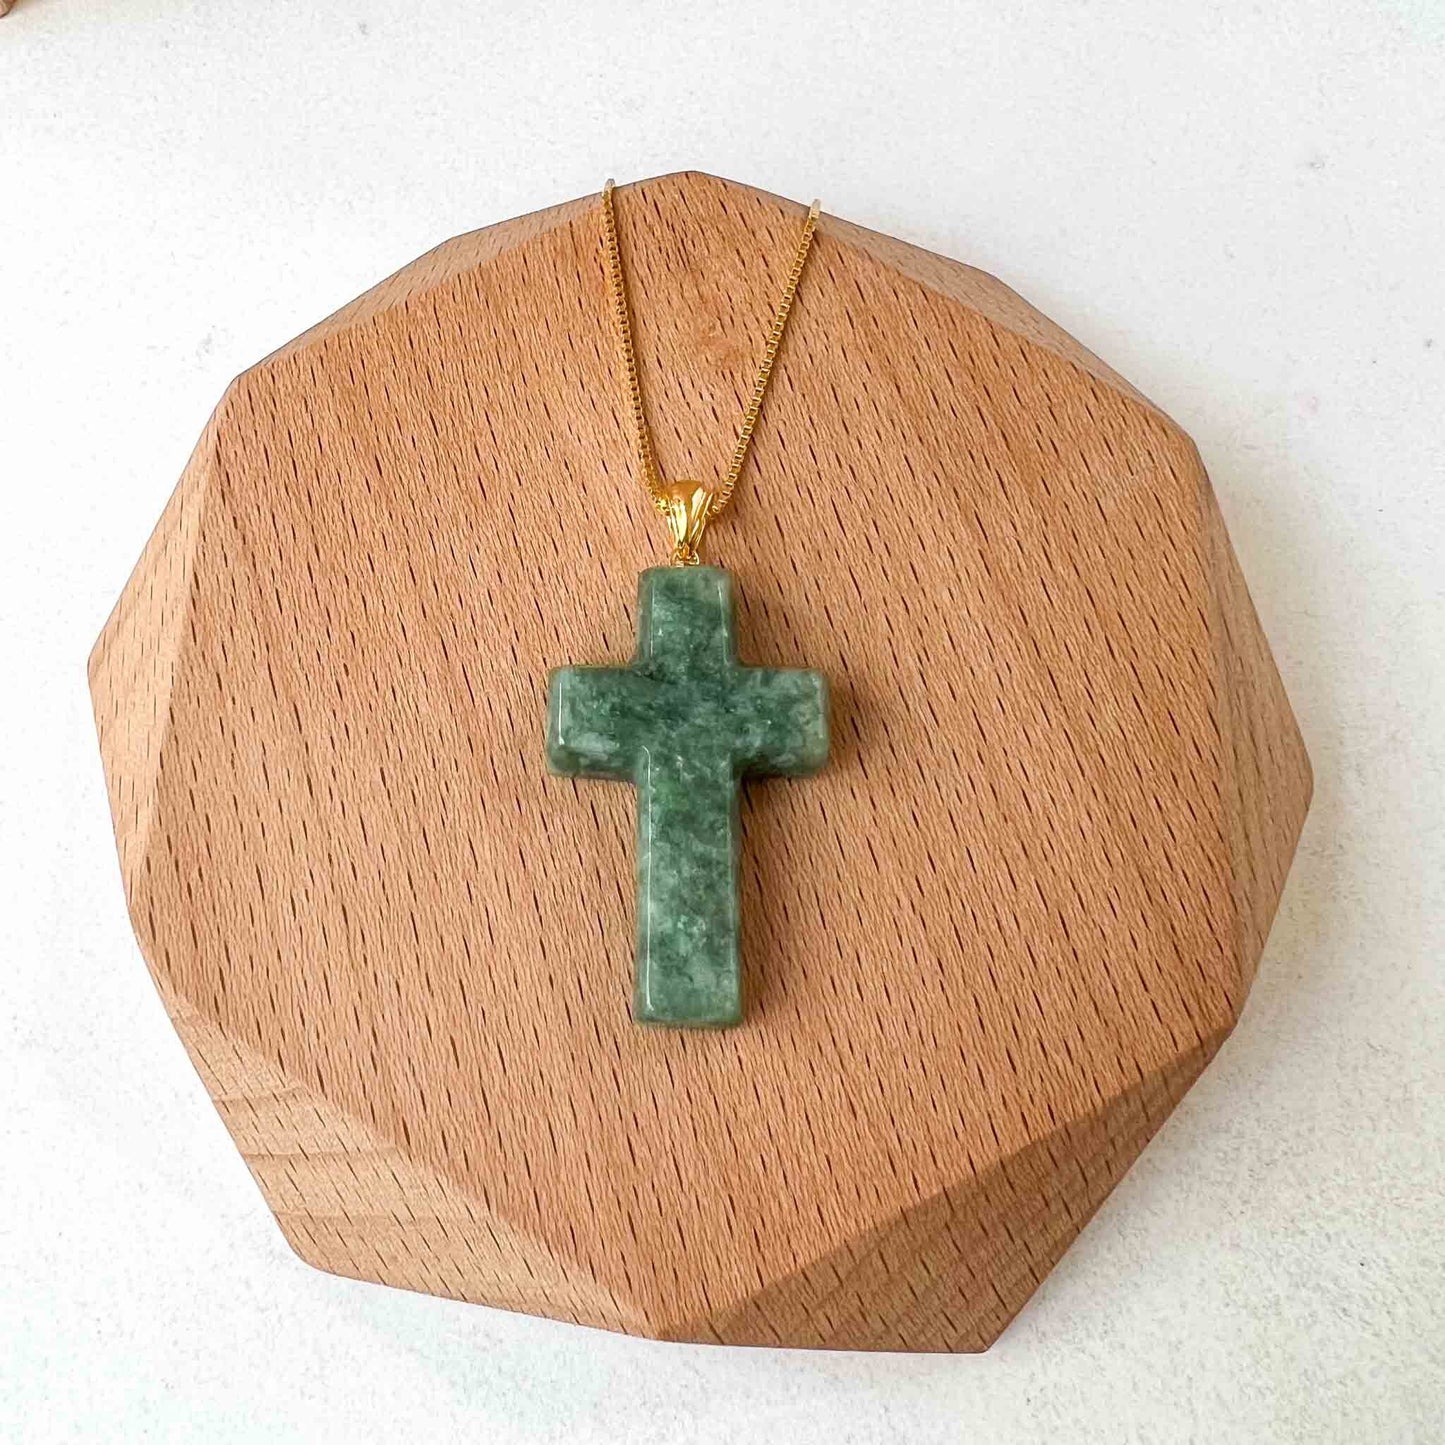 Green Jadeite Jade Cross with 18K Solid Gold Bail Carved Pendant, SHWQ-0823-1699507269